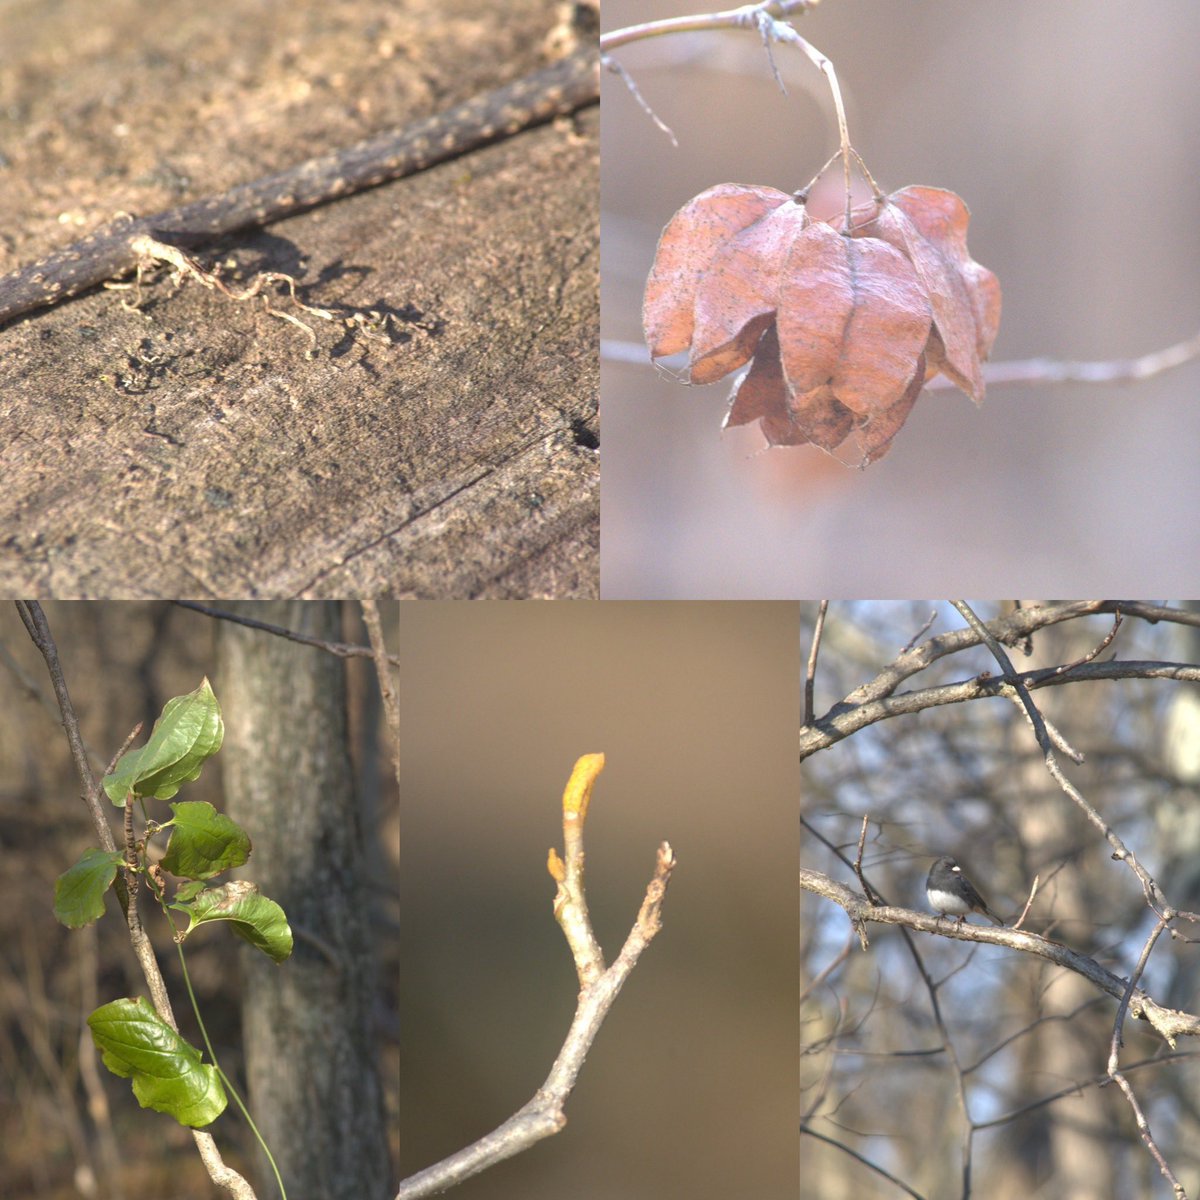 We would like to thank Naturalist James for capturing some nature pictures from the Terradise Nature Preserve. #naturalistjamesanderson #LoveYourMCPDParks #MarionCountyParkDistrict #wildlife #naturephotography #ohiowildlife #ohionaturelover #ohionaturelovers #nature #MarionMade